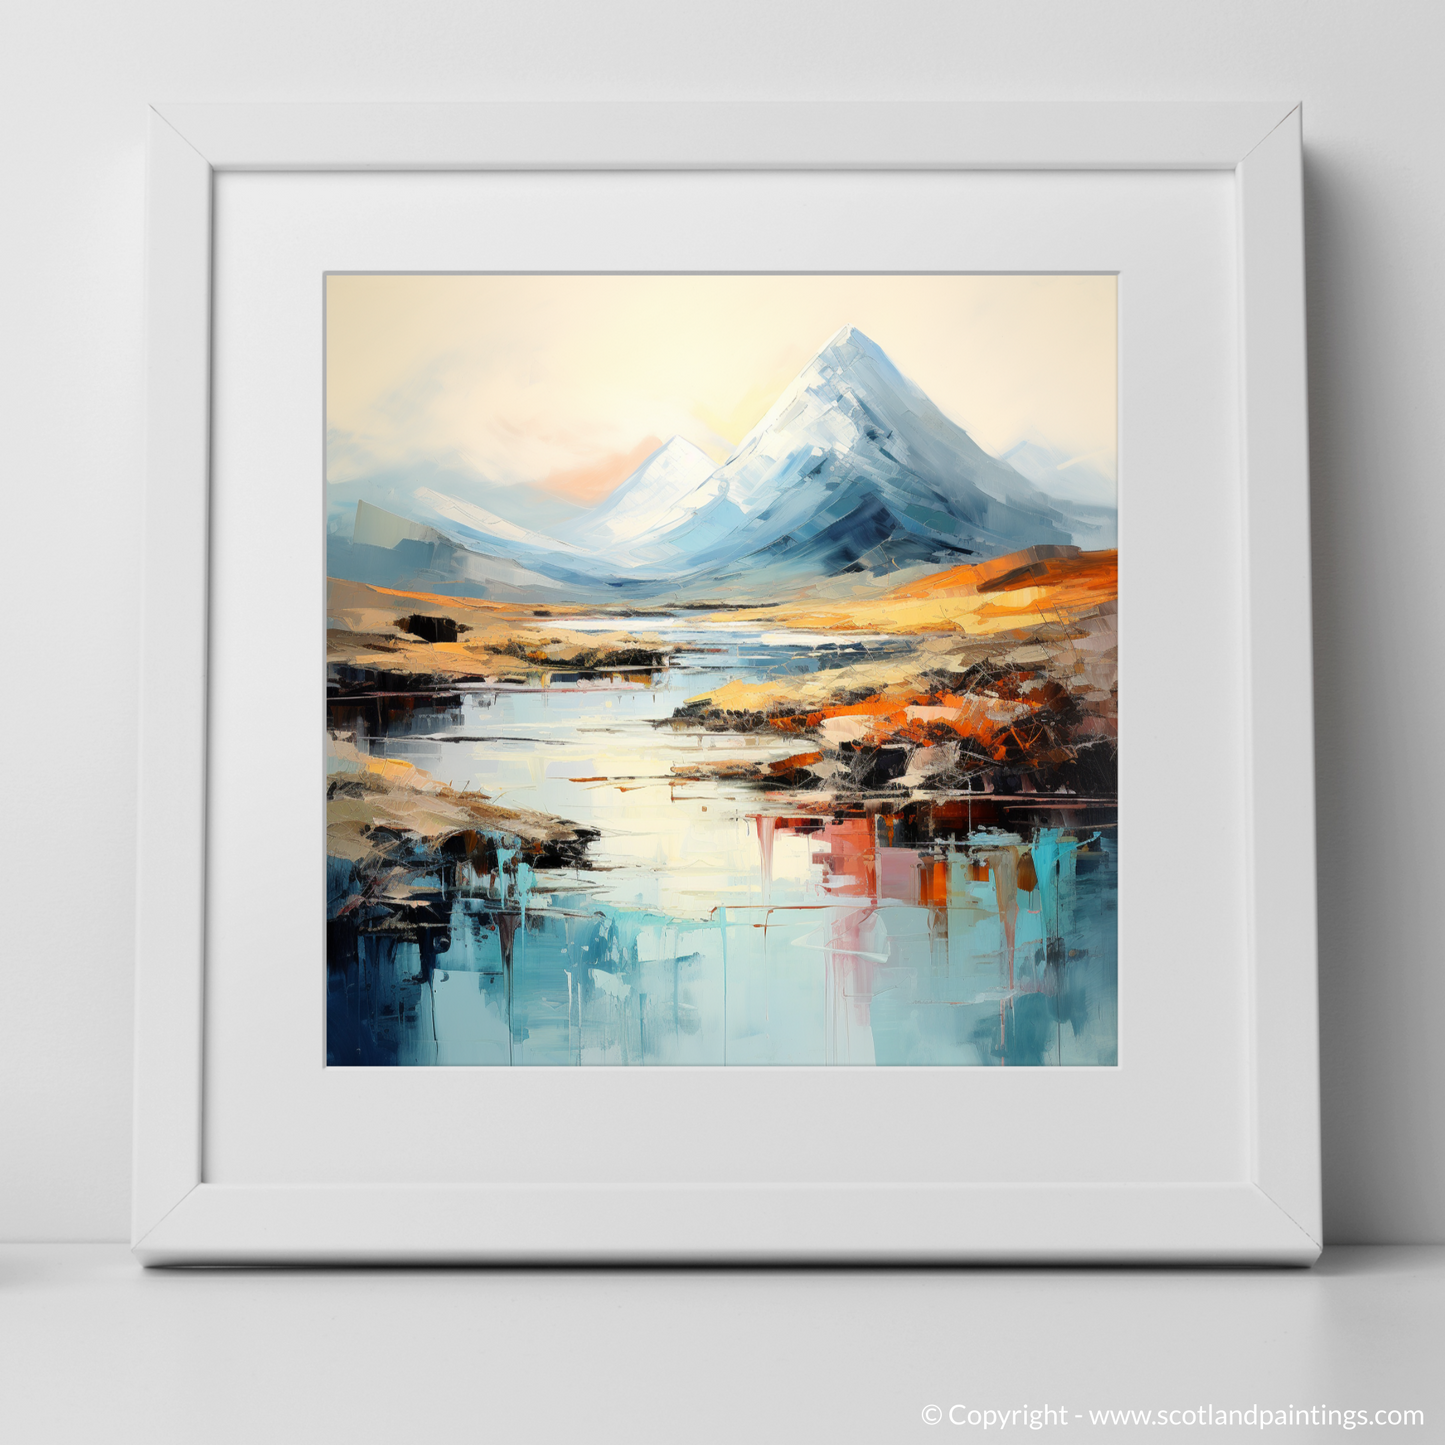 Highland Majesty: An Abstract Tribute to Buachaille Etive Mòr